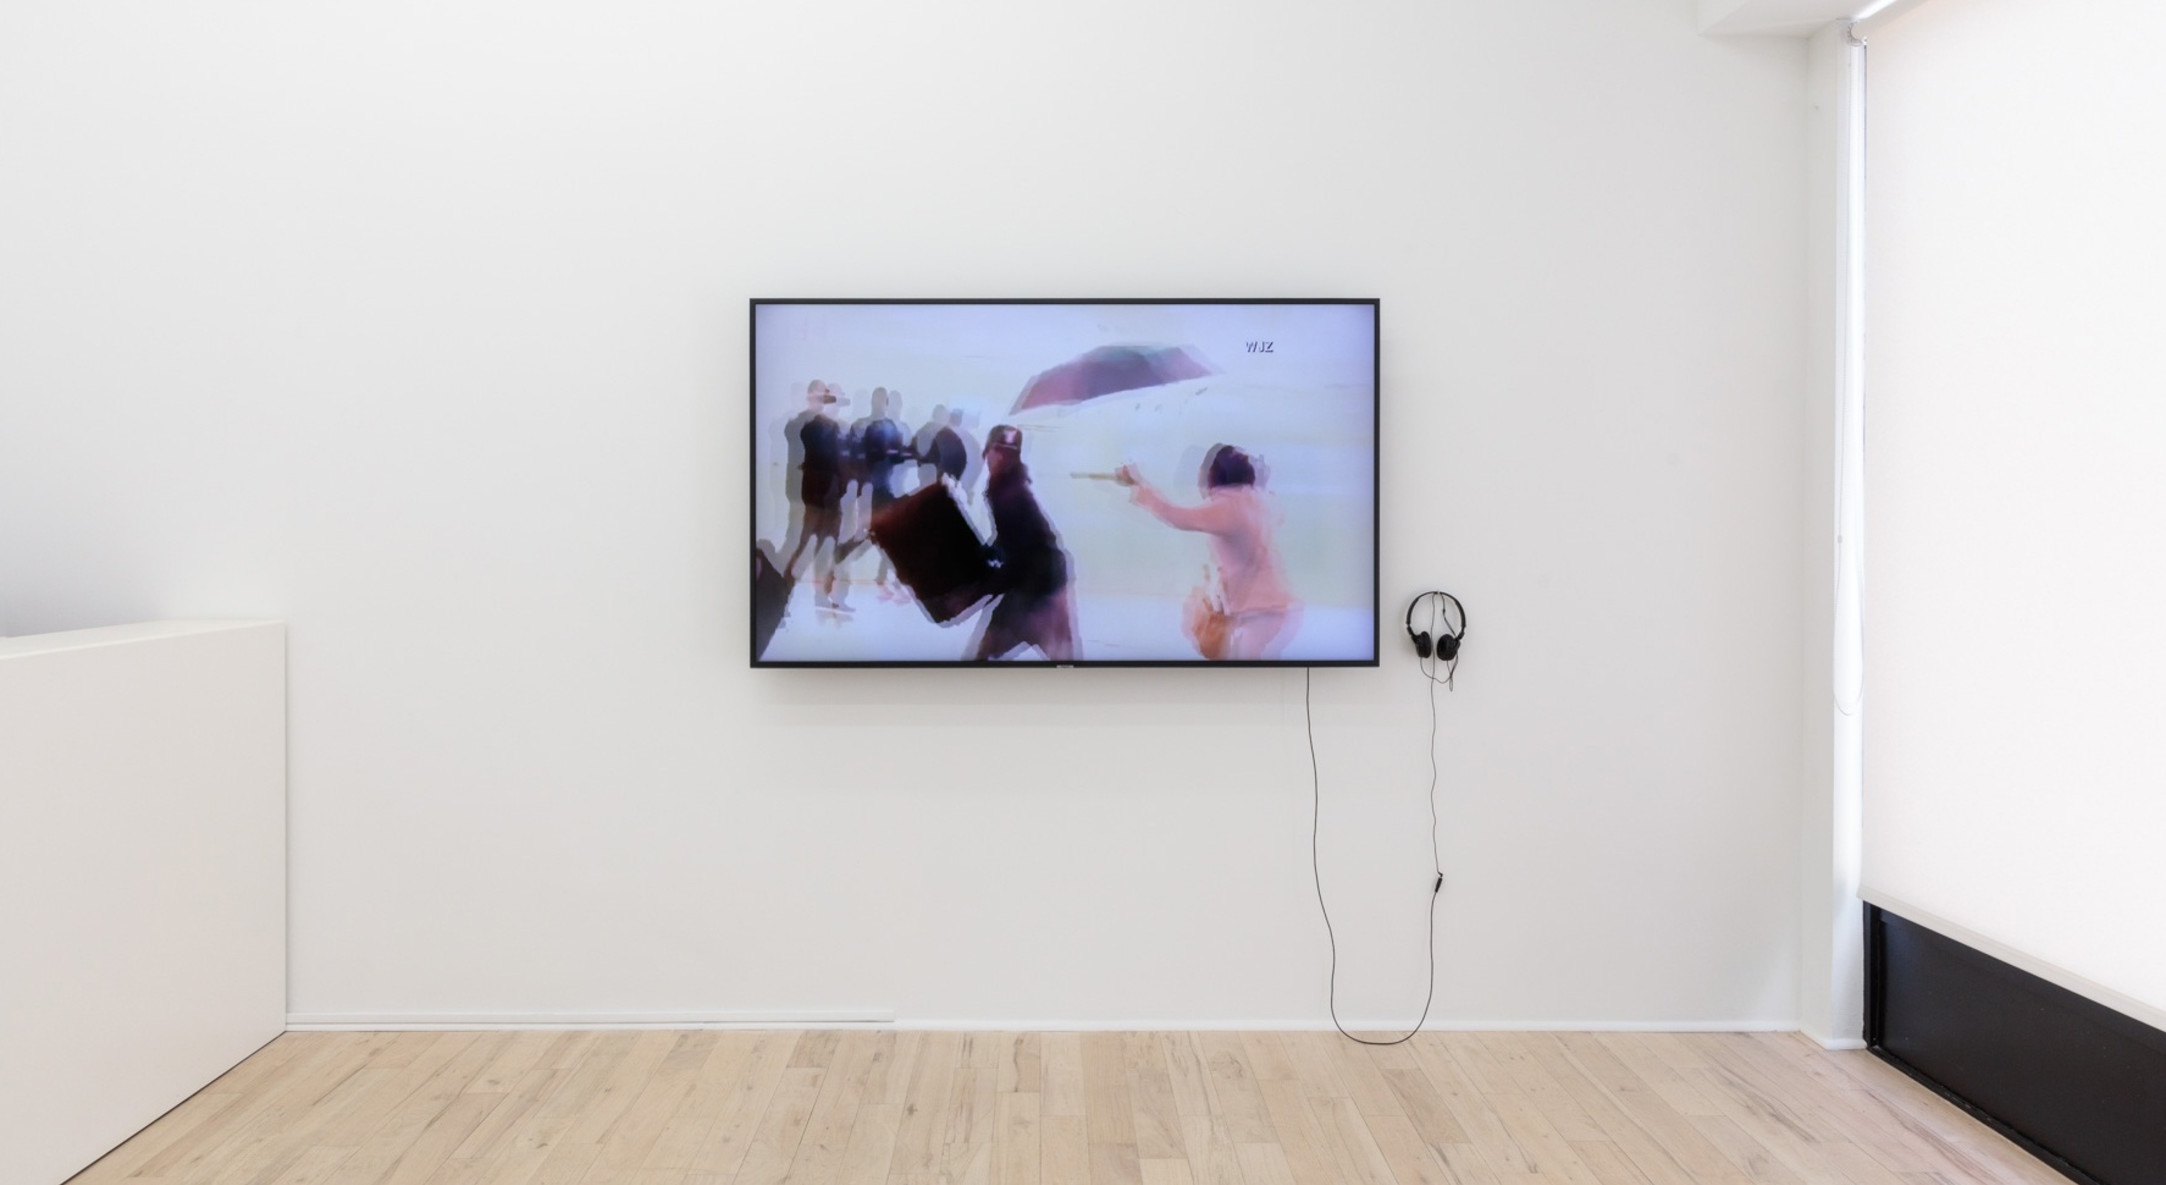 Installation view of How Does This Make You Feel?, Ja’Tovia Gary, Shigeko Kubota, Hunter Reynolds, Erica Scourti, at Hales Project Room, New York